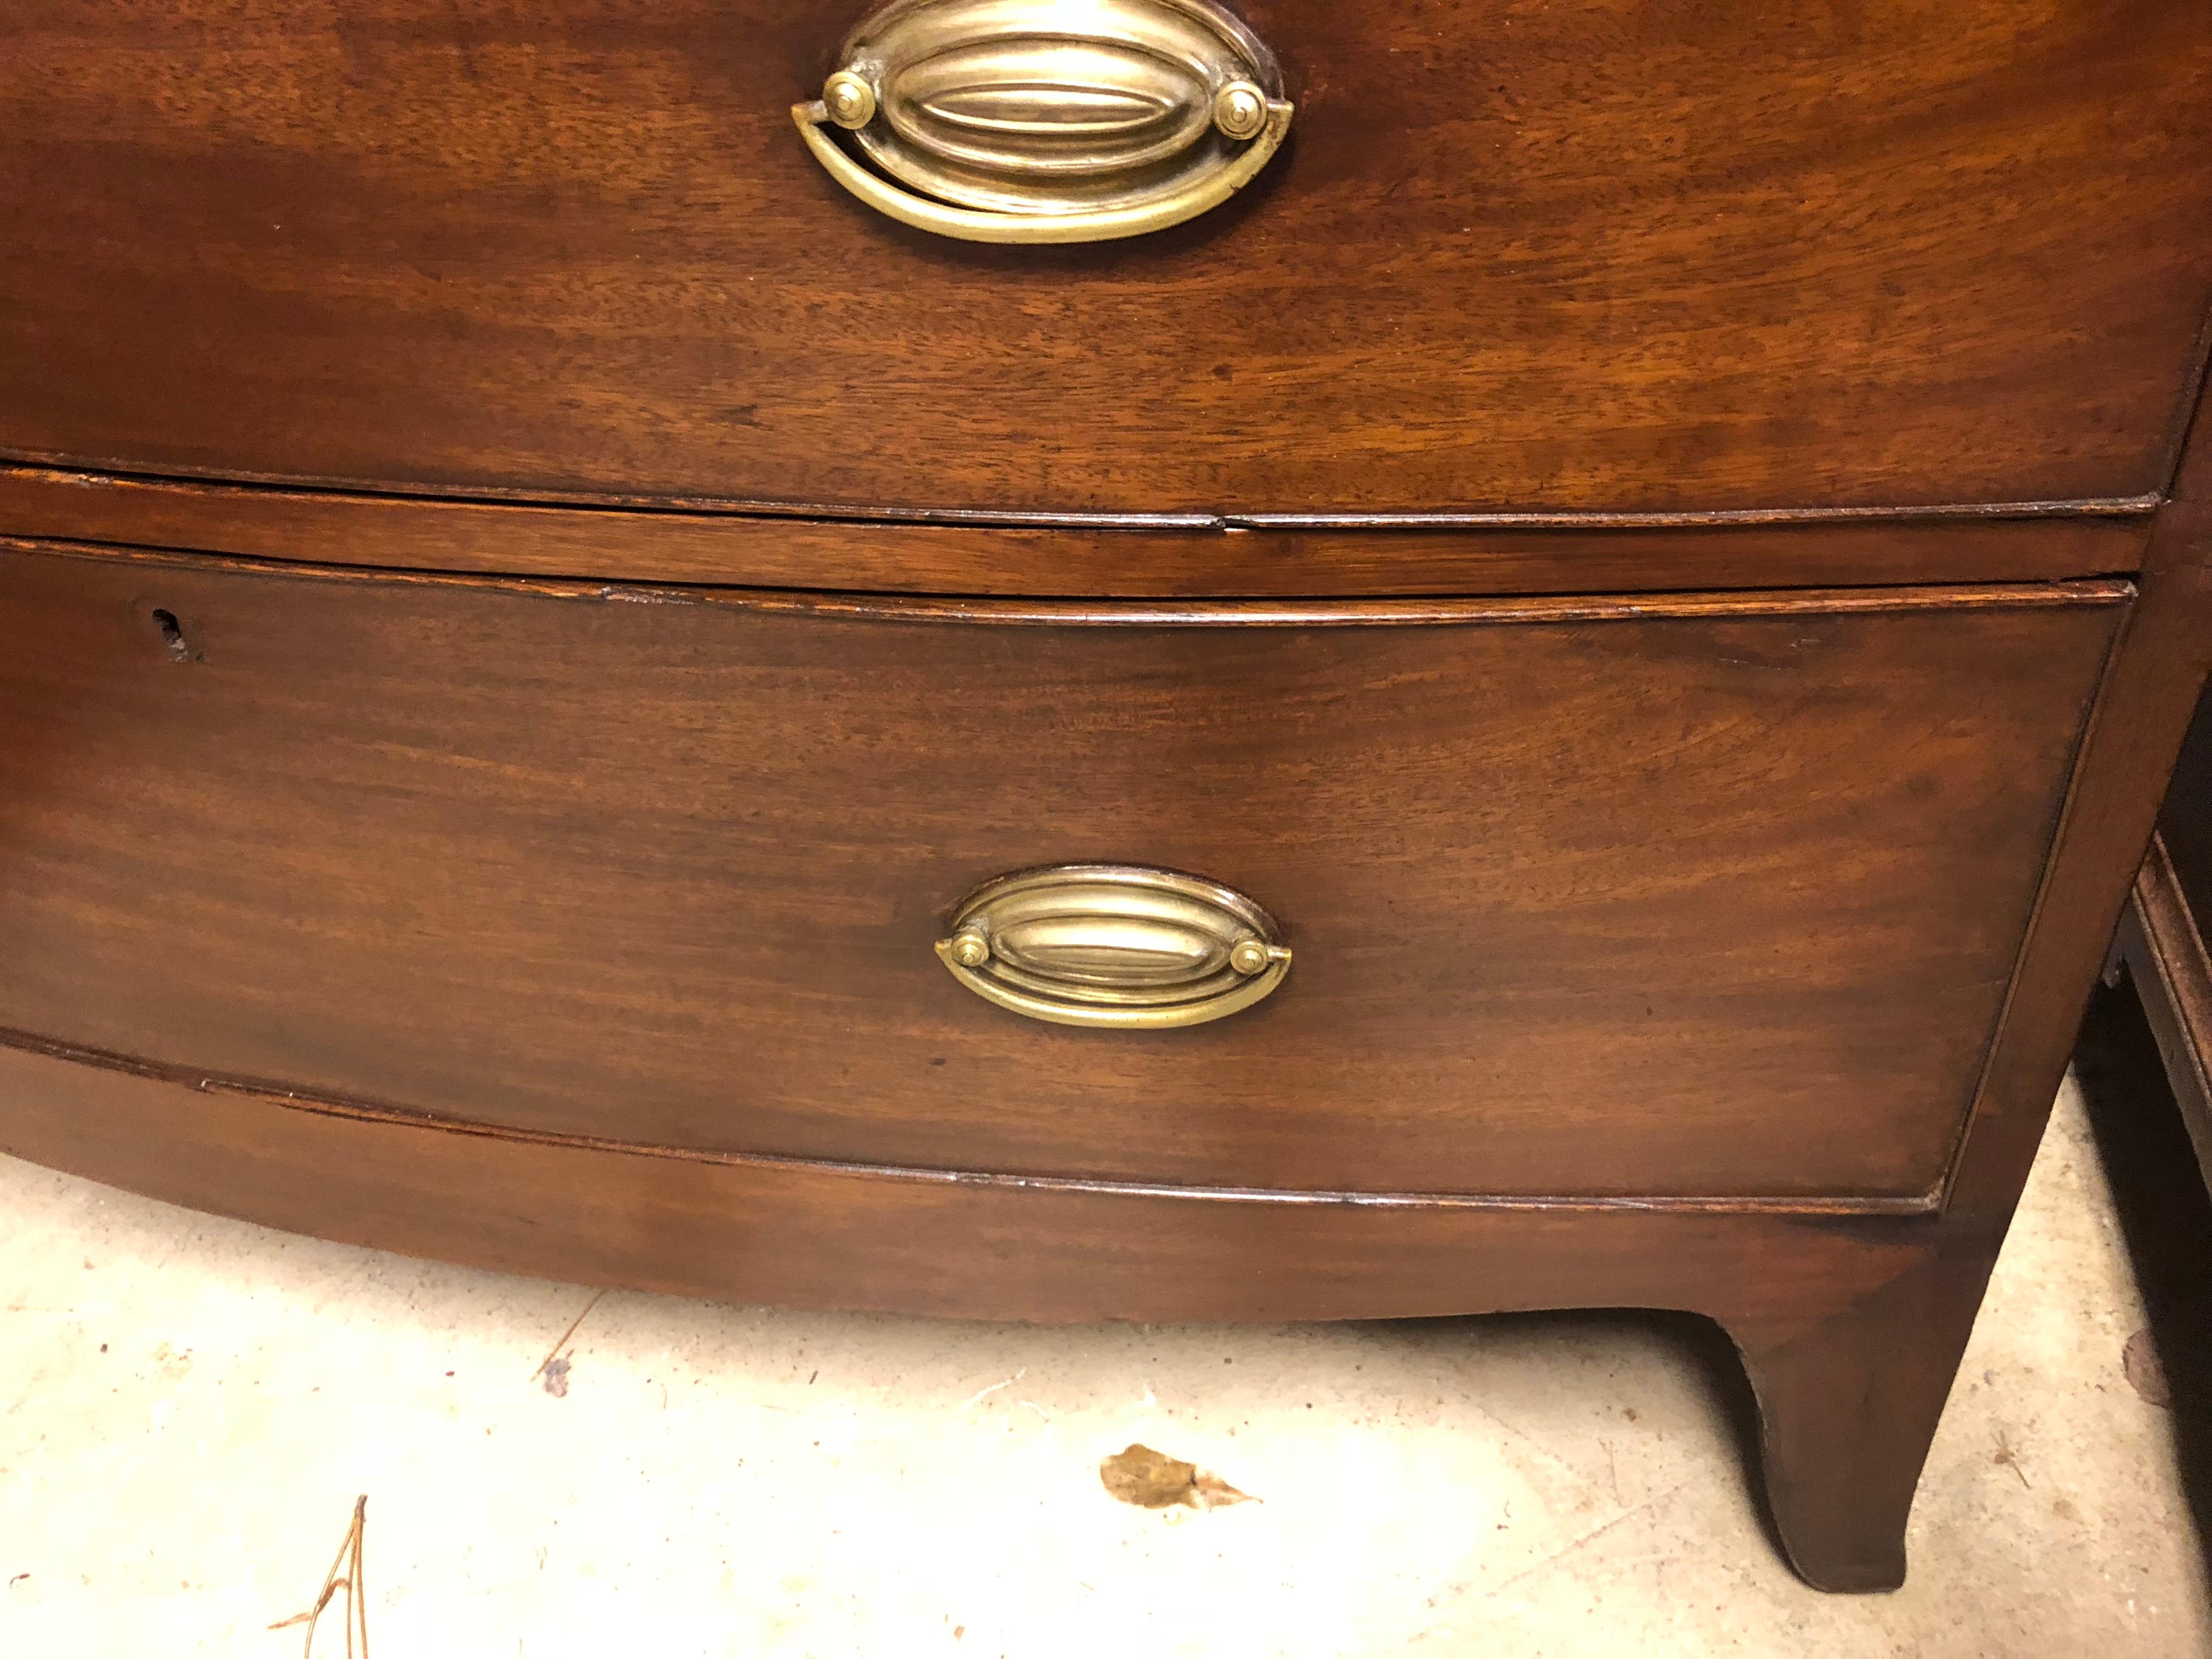 English bow front chest, circa 1830, inlaid round dark wood escutcheons, nice skirt and feet, oak interiors, replacement solid brass ovals, drawers work well, tall and not too deep. A traditional bow front chest in medium to dark mahogany.